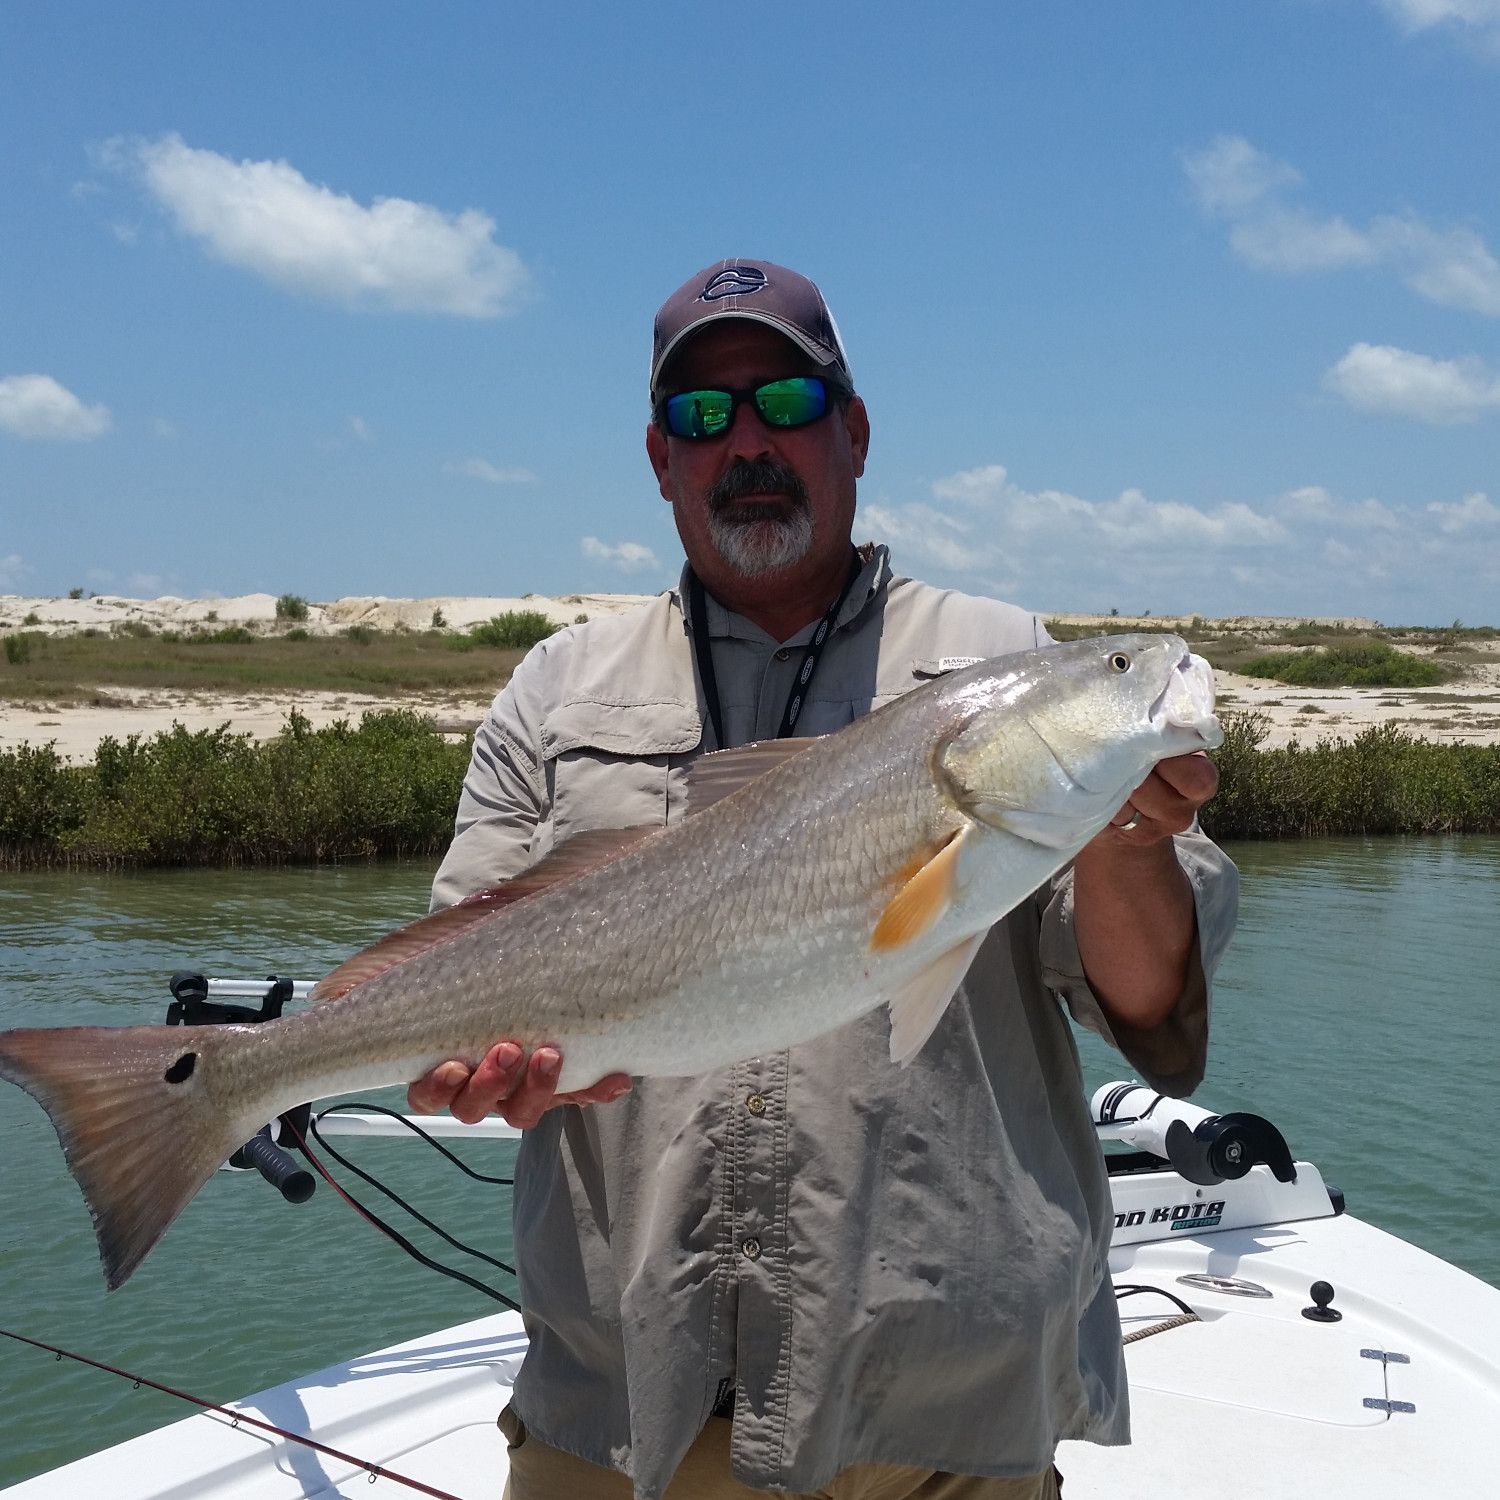 Title: Nice redfish - On board their Sportsman Tournament 214 Bay Boat - Location: Ingleside texas. Participating in the Photo Contest #SportsmanDecember2017